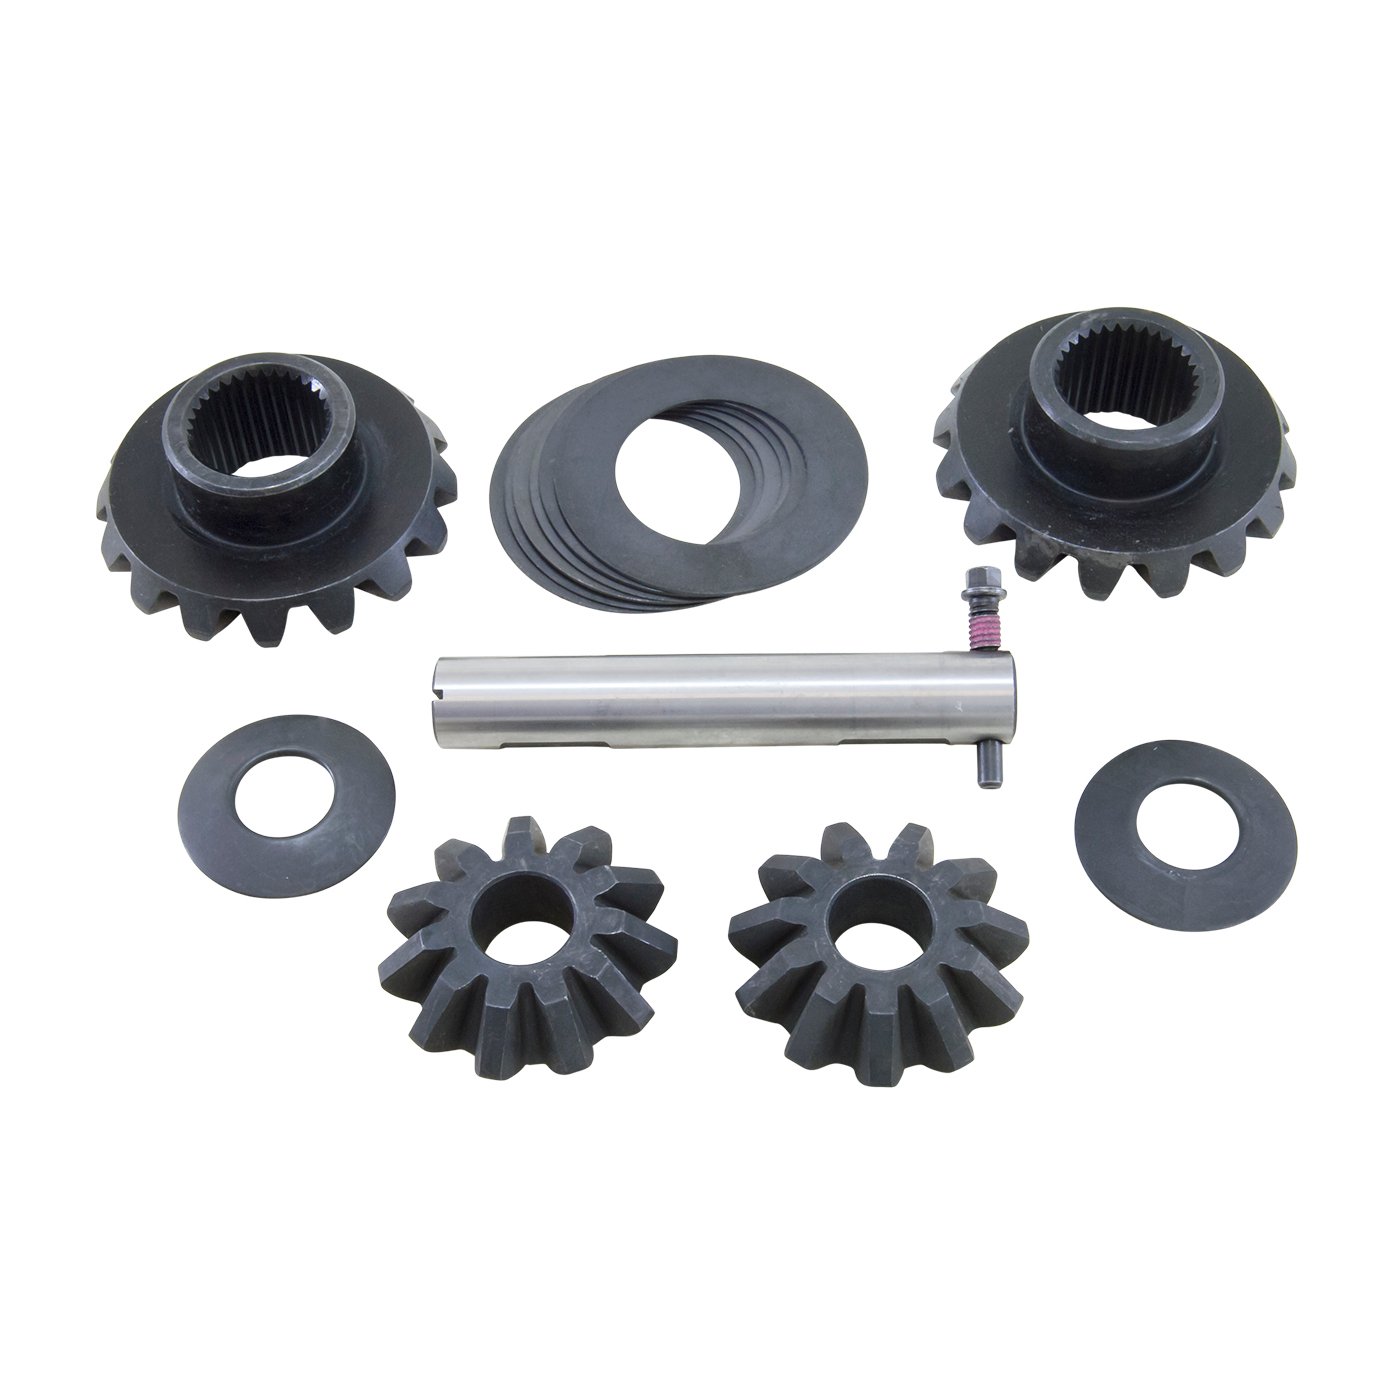 Standard Open Spider Gear Kit Chrysler 9.25" Rear with Open Differential